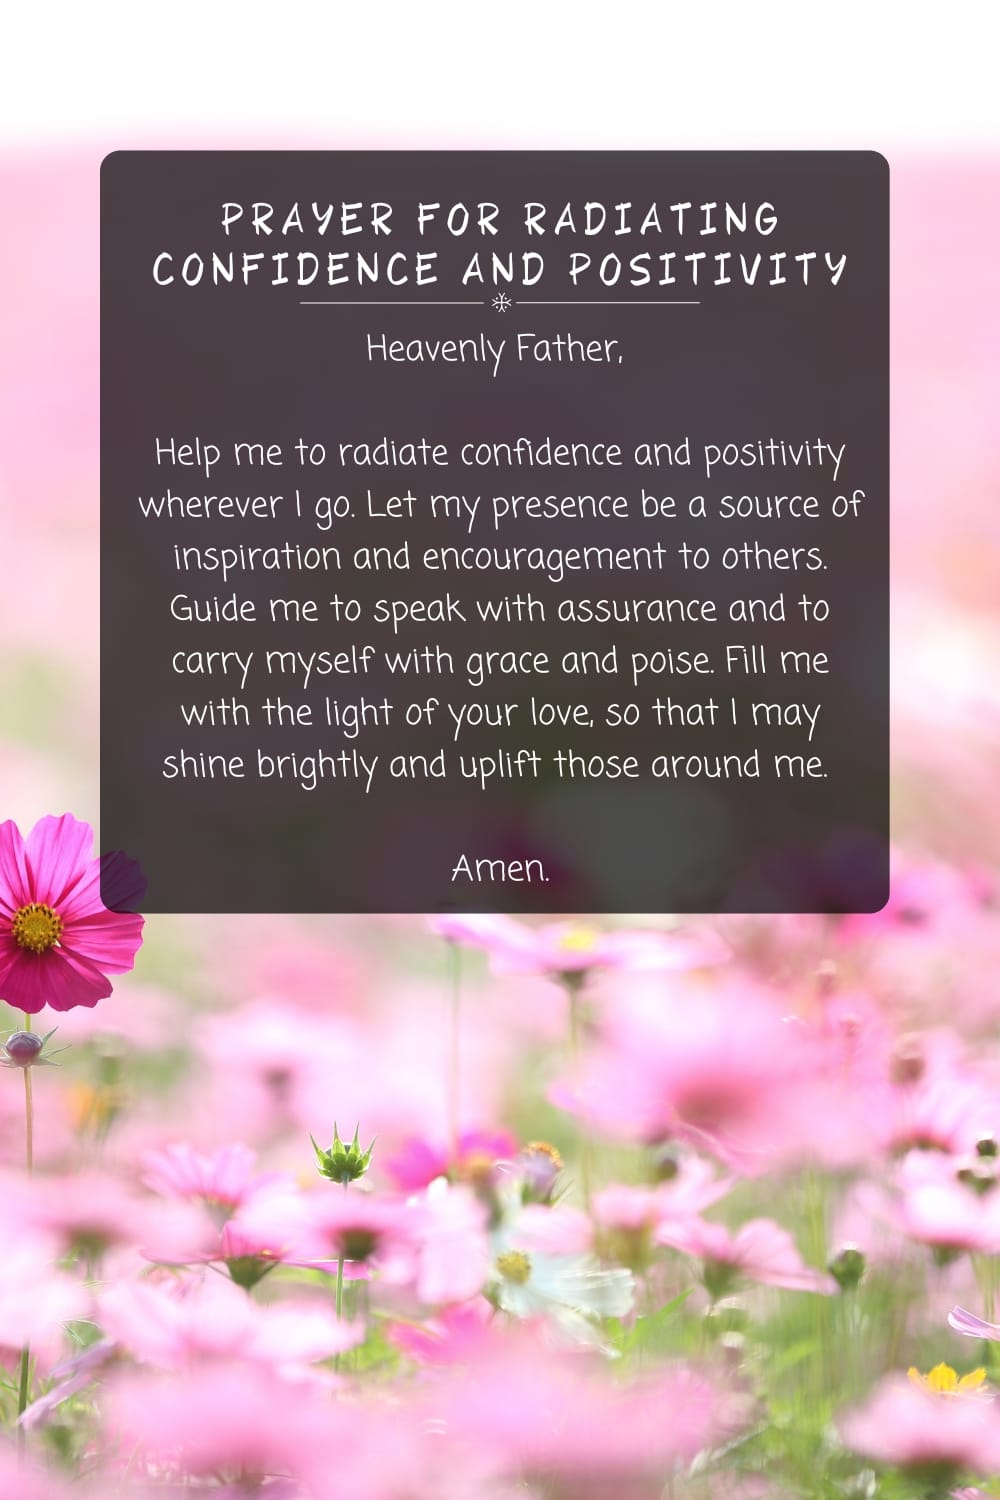 Prayer for Radiating Confidence and Positivity